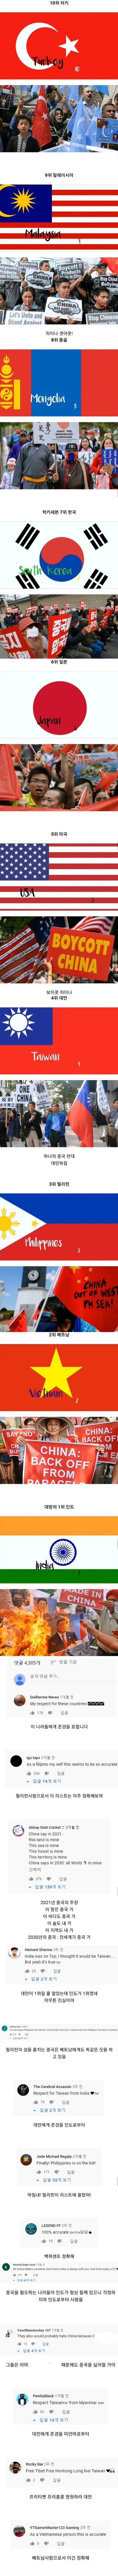 Top 10.jpg, a country that hates China.